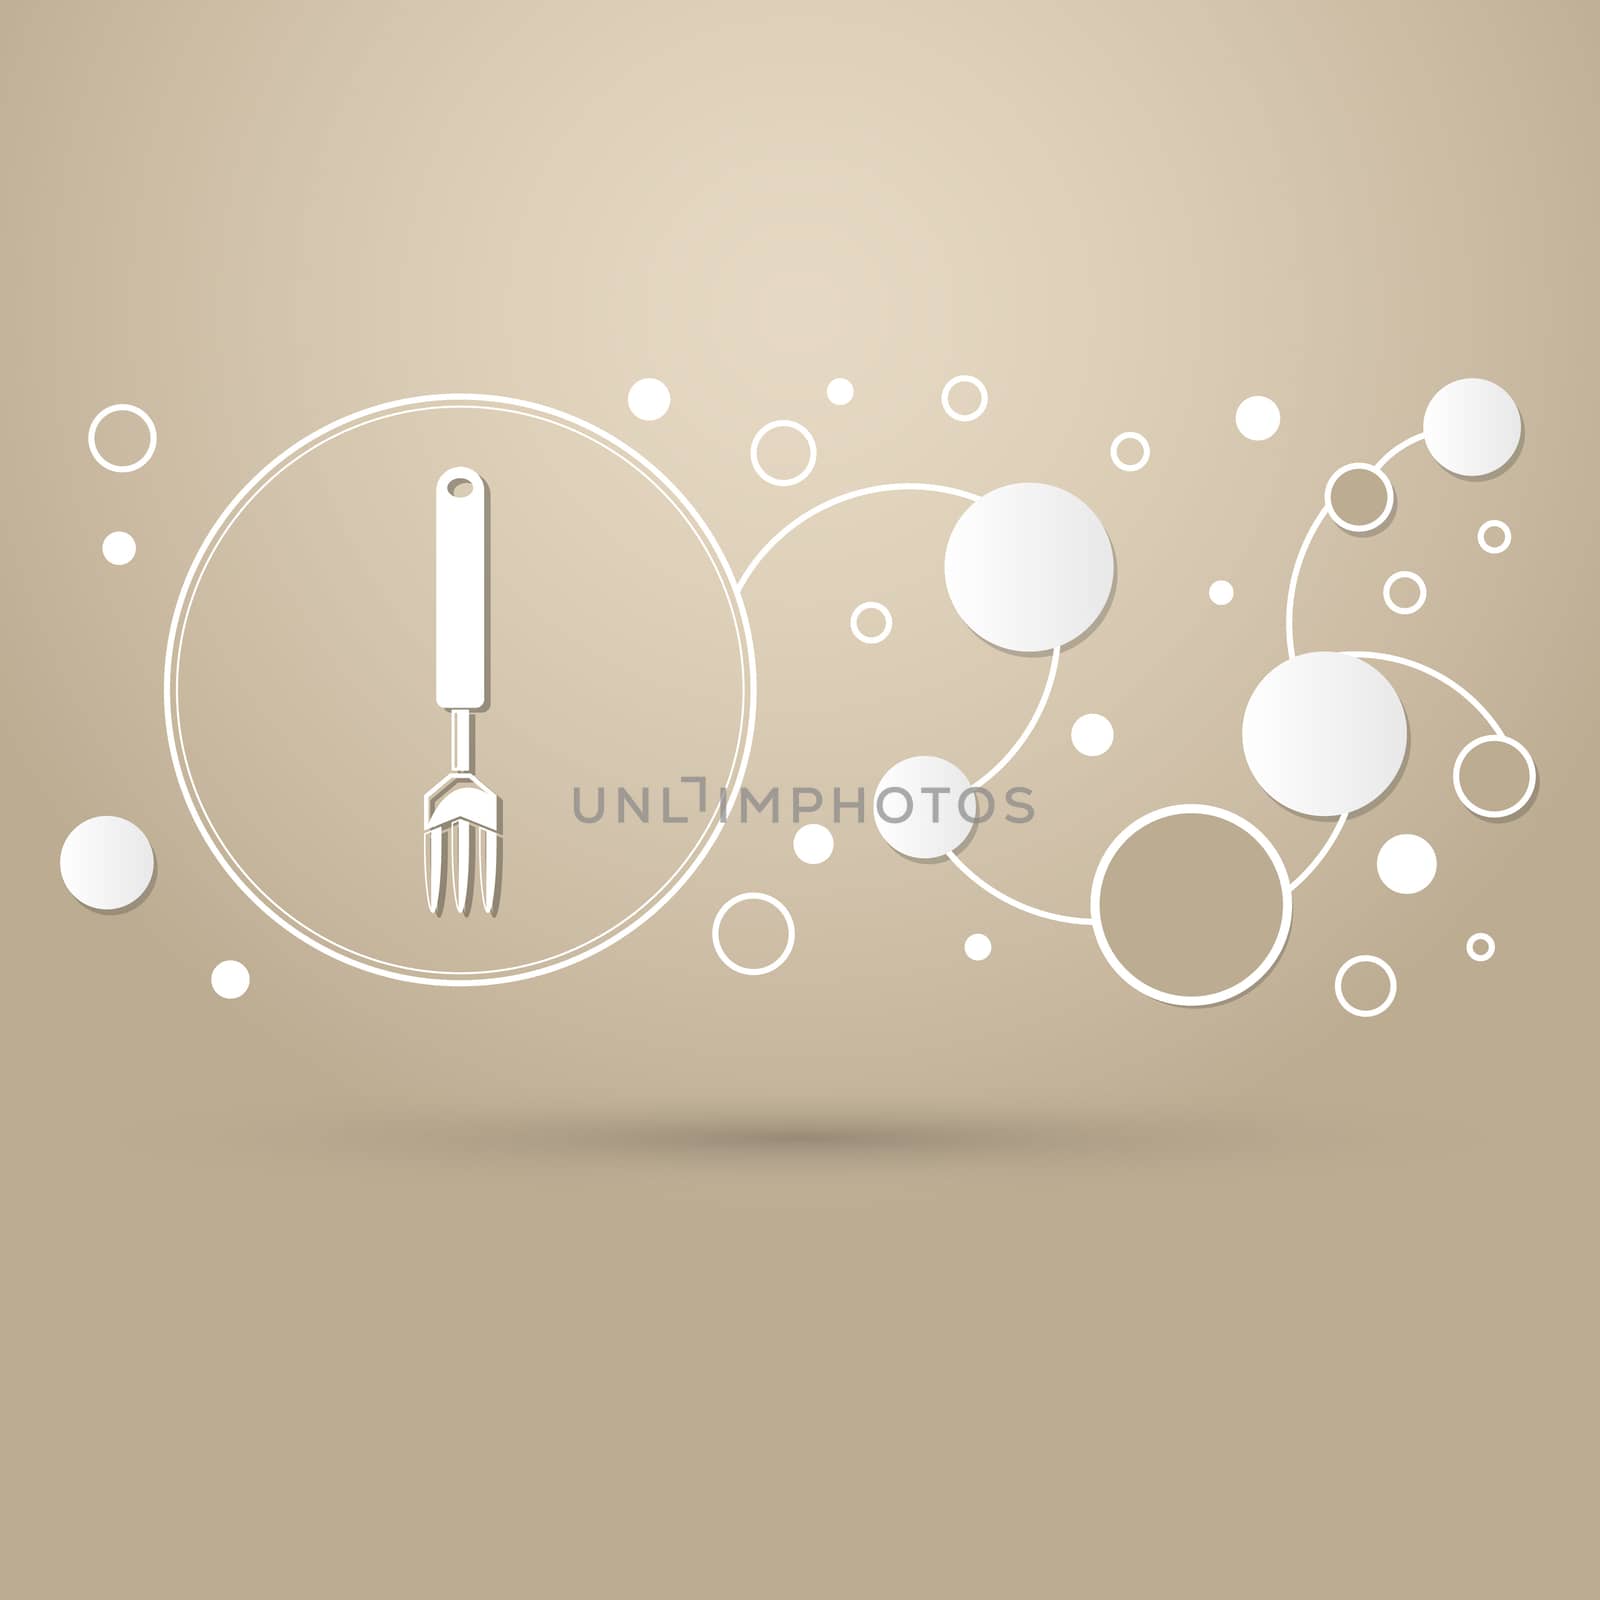 fork icon on a brown background with elegant style and modern design infographic.  by Adamchuk